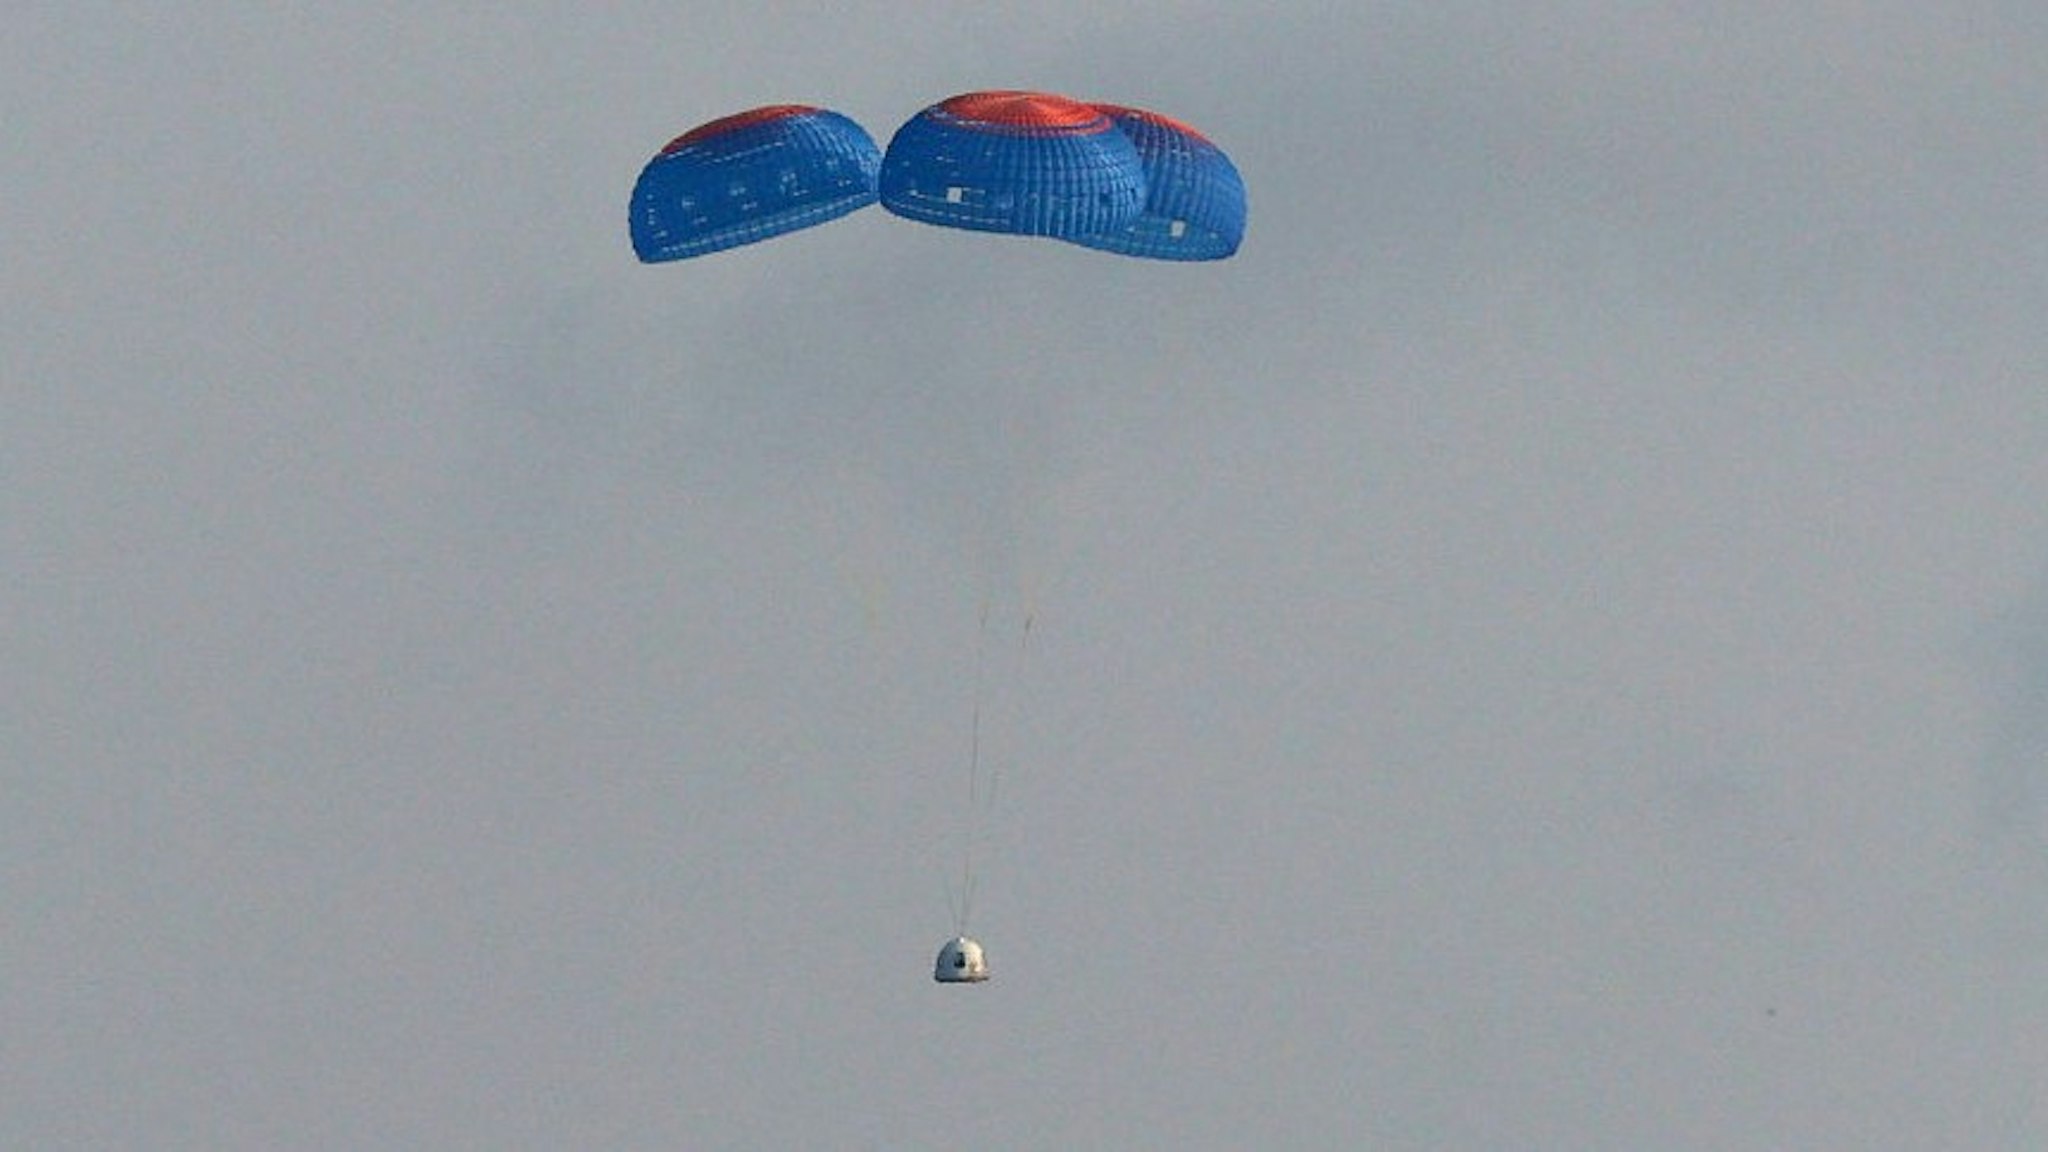 VAN HORN, TEXAS - JULY 20: Blue Origin’s New Shepard crew capsule descends on the end of its parachute system carrying Jeff Bezos along with his brother Mark Bezos, 18-year-old Oliver Daemen, and 82-year-old Wally Funk on July 20, 2021 in Van Horn, Texas. Mr. Bezos and the crew are riding in the first human spaceflight for the company. (Photo by